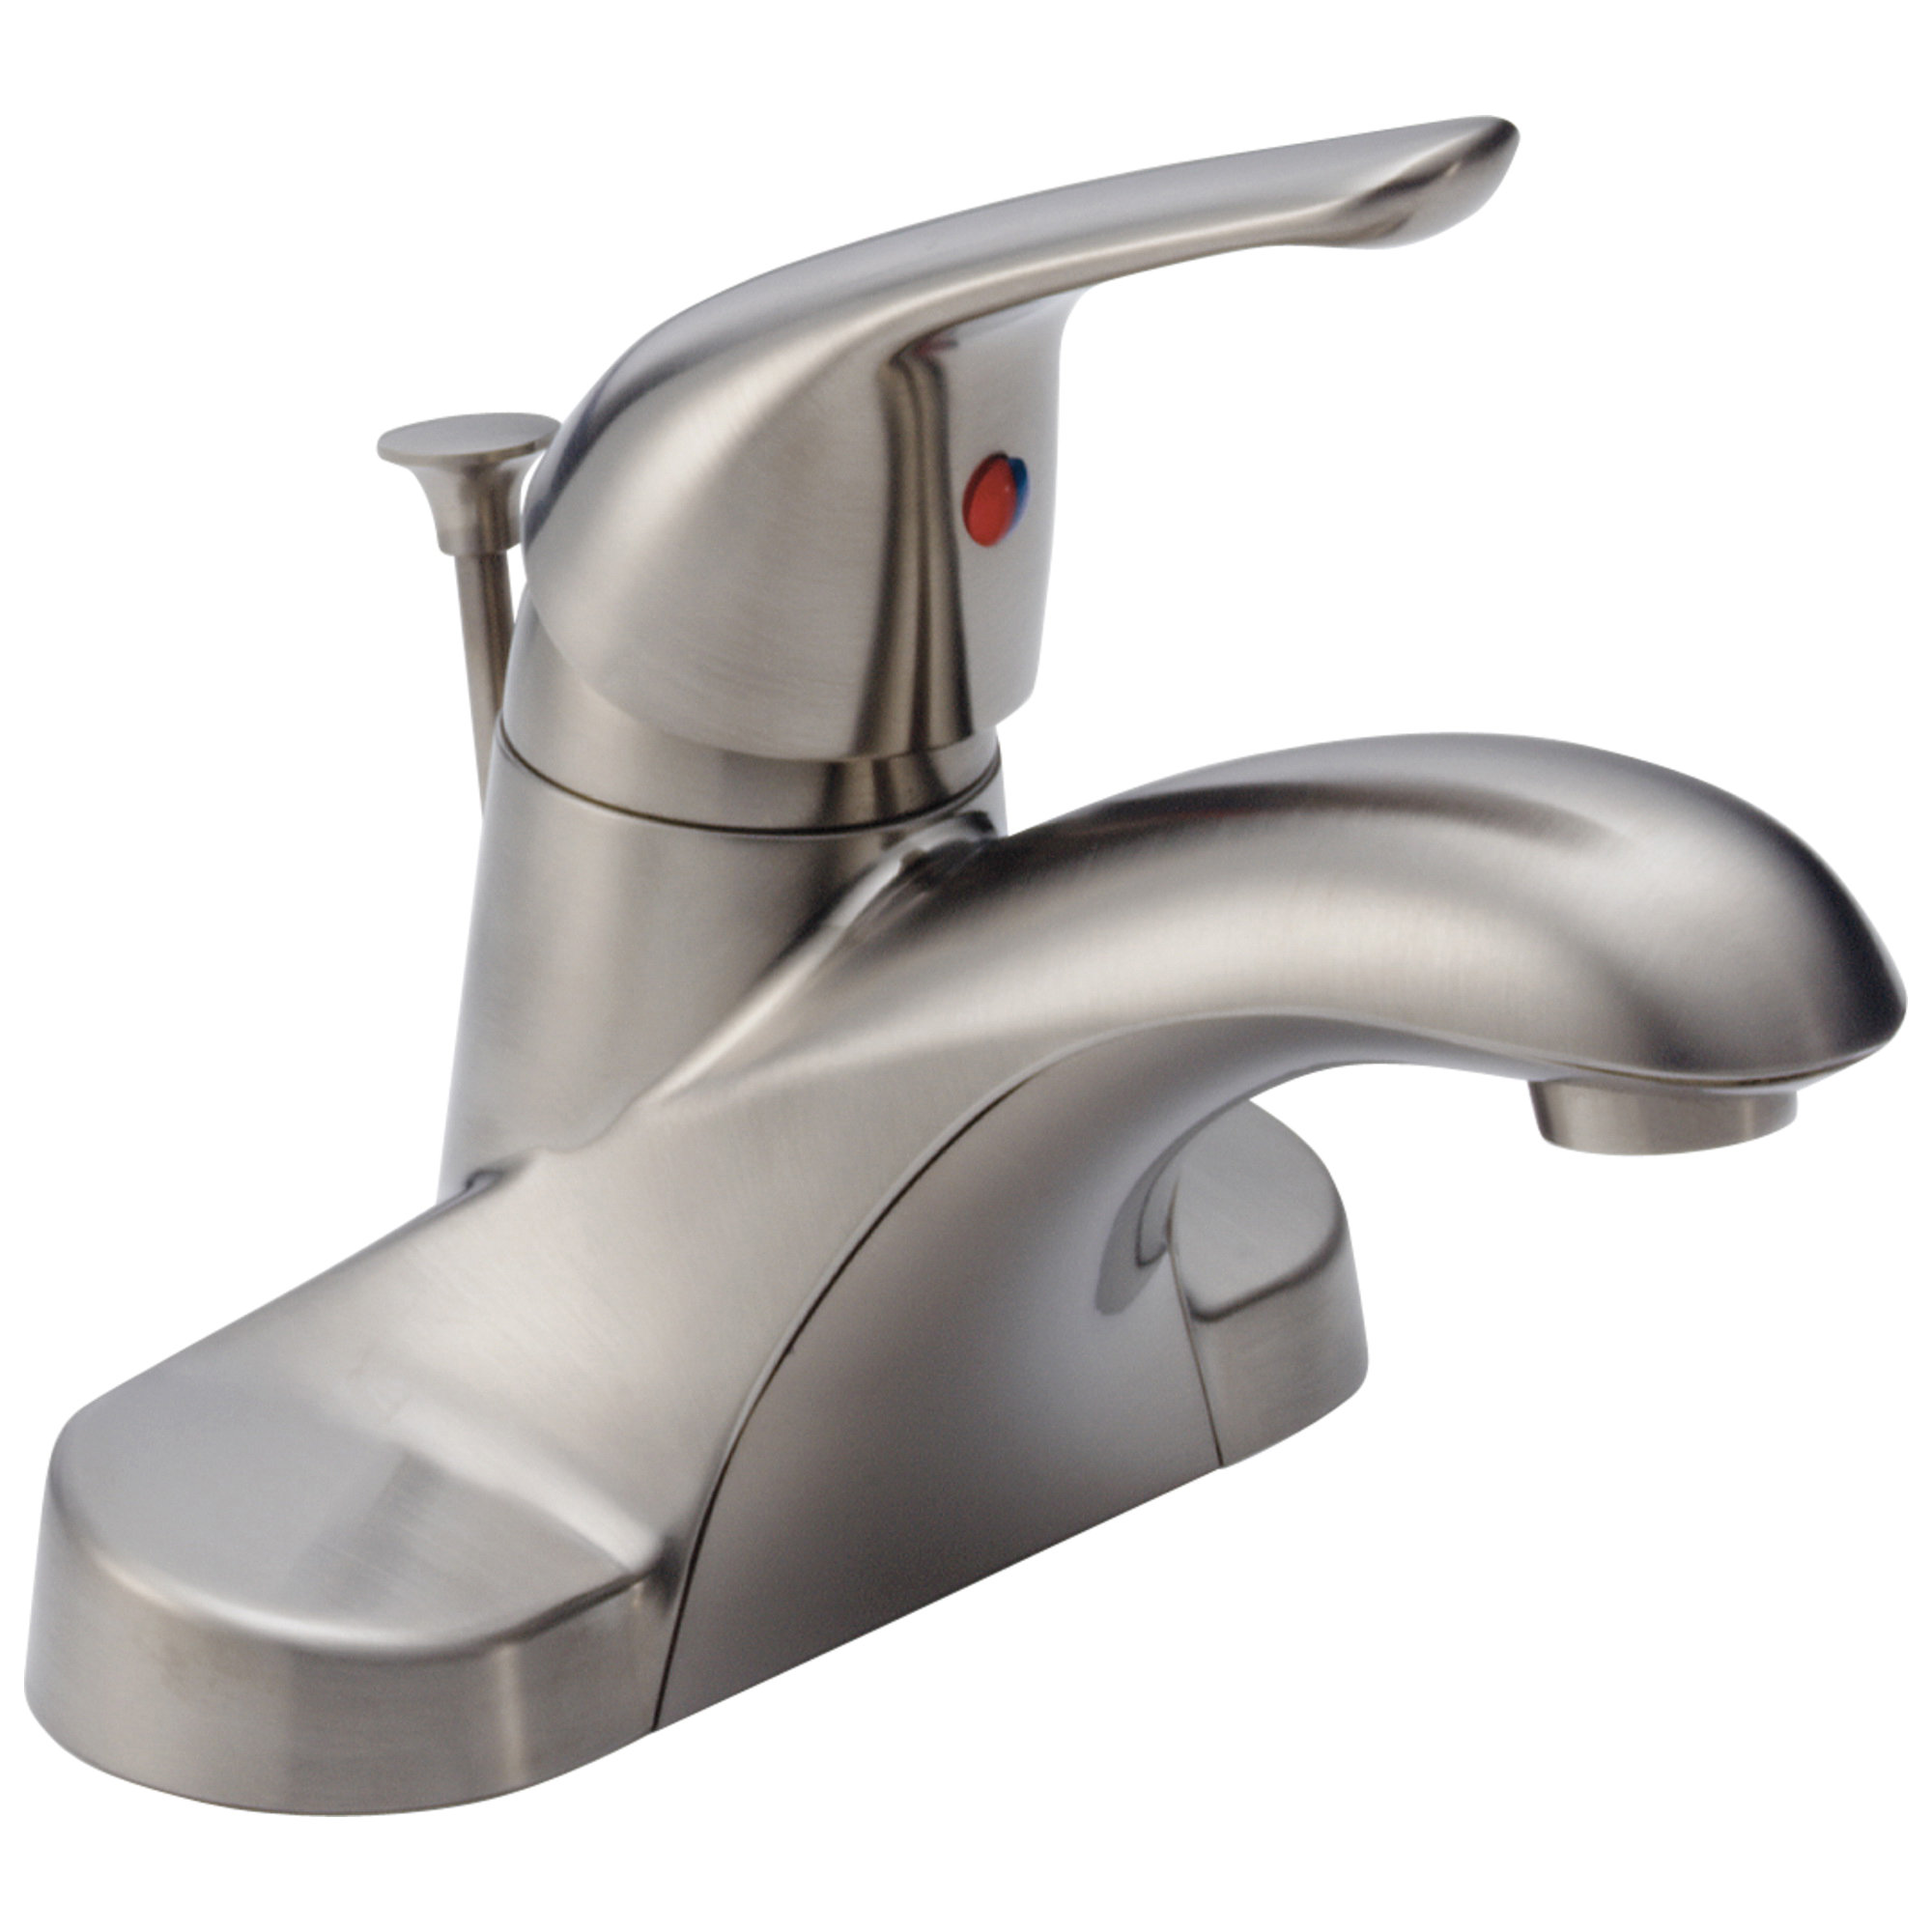 DELTA® B510LF-SS Centerset Lavatory Faucet, Foundations®, Stainless Steel, 1 Handles, Pop-Up Drain, 1.5 gpm